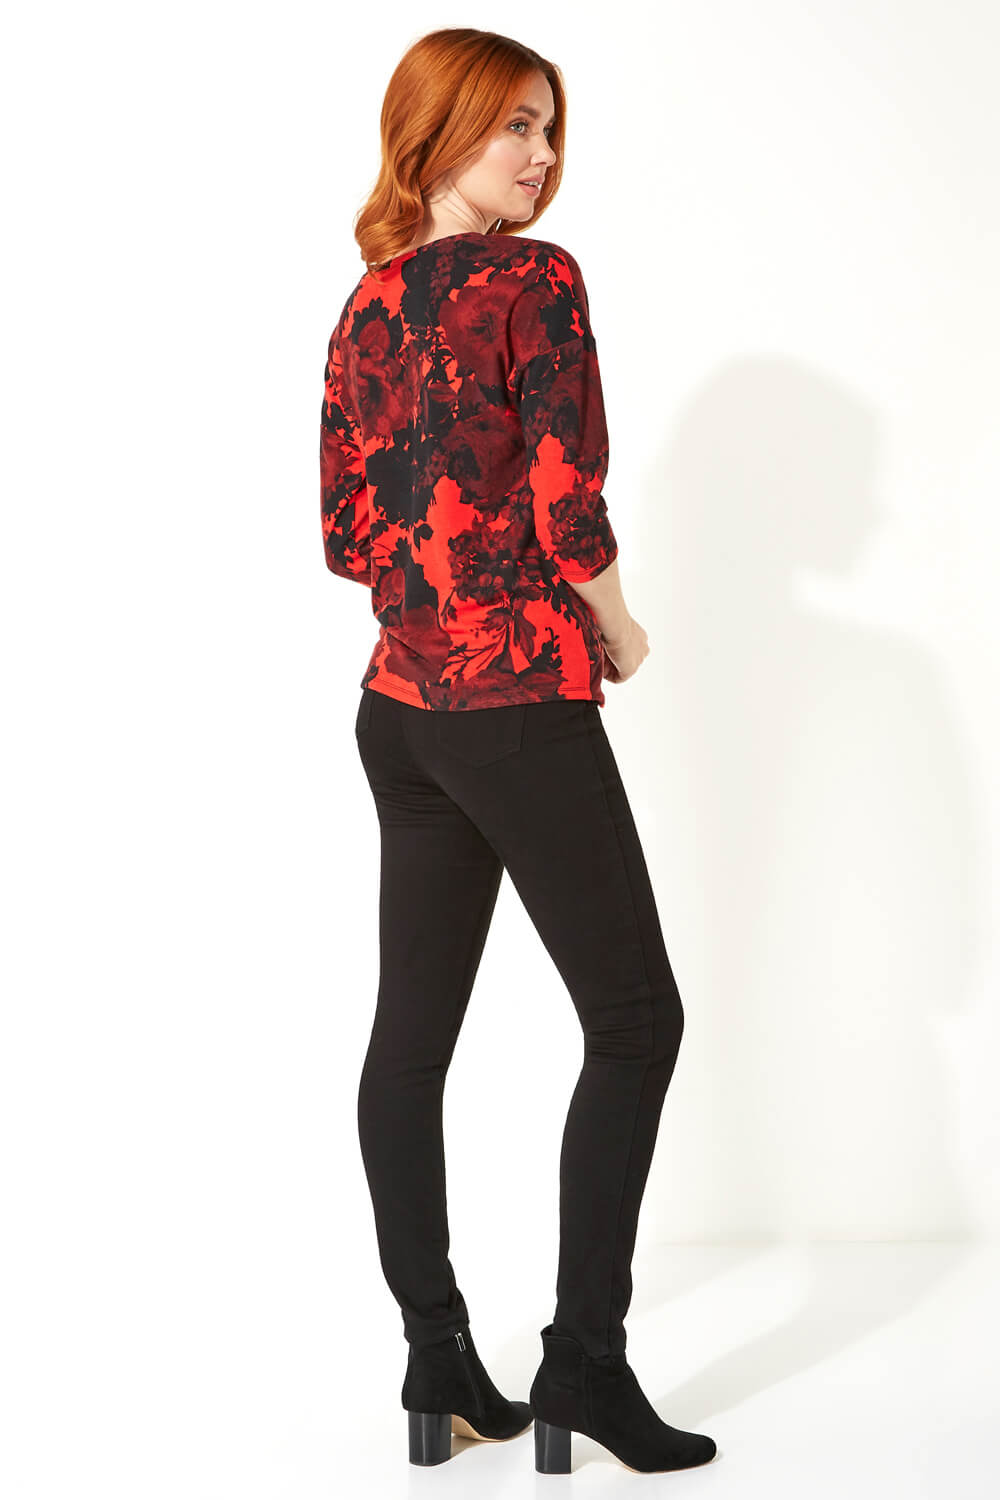 Red Floral Print 3/4 Sleeve Top, Image 3 of 5